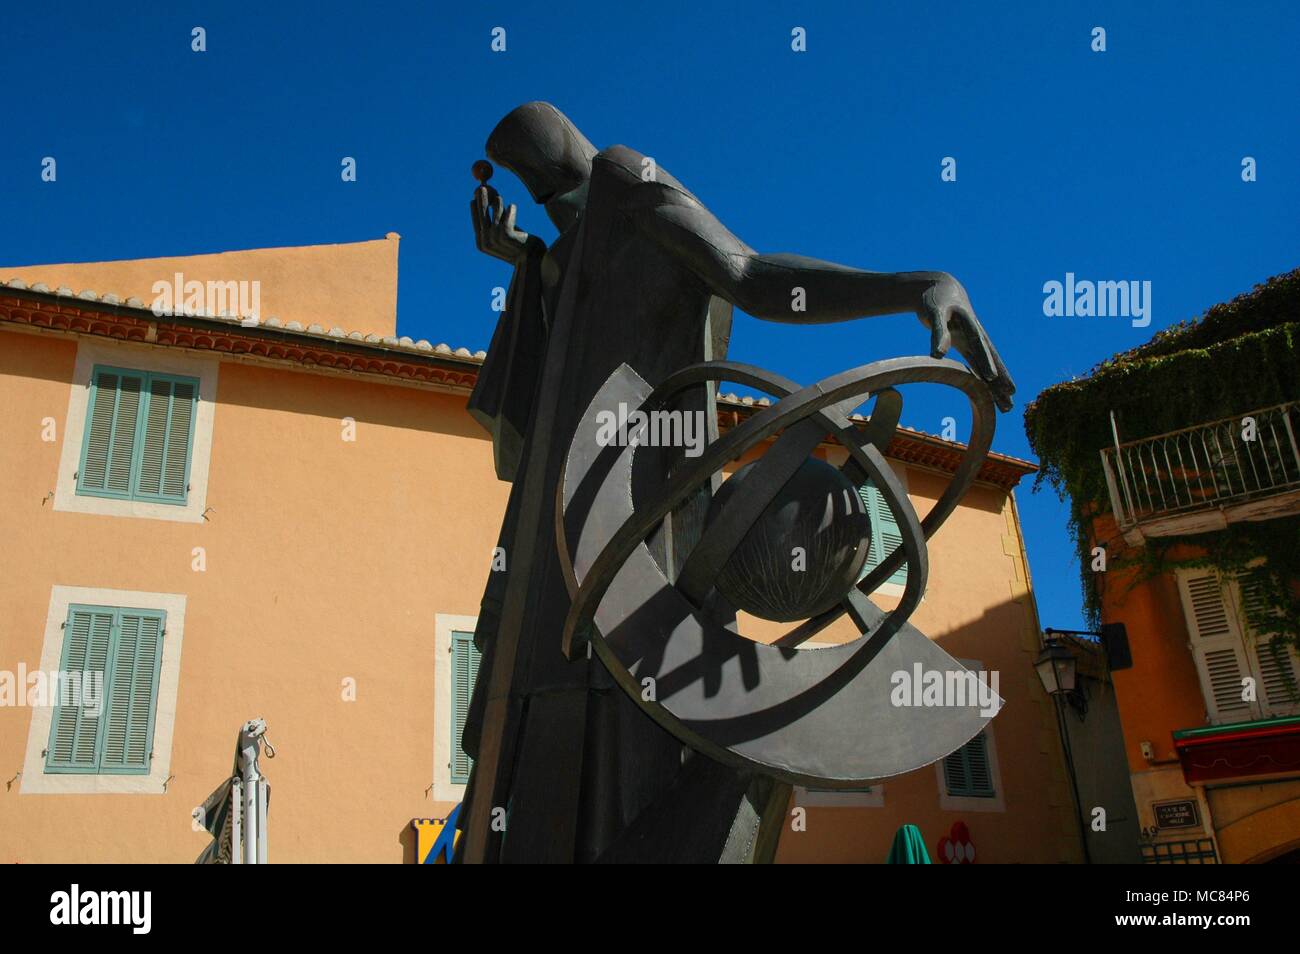 Sculpted in 1966, to celebrate the 400 anniversary of Nostradamus' death, the savant is depicted looking upon an hourglass. The statue is now in the old square within the walls of Salon, close to the house formerly owned by Nostradamus. Stock Photo